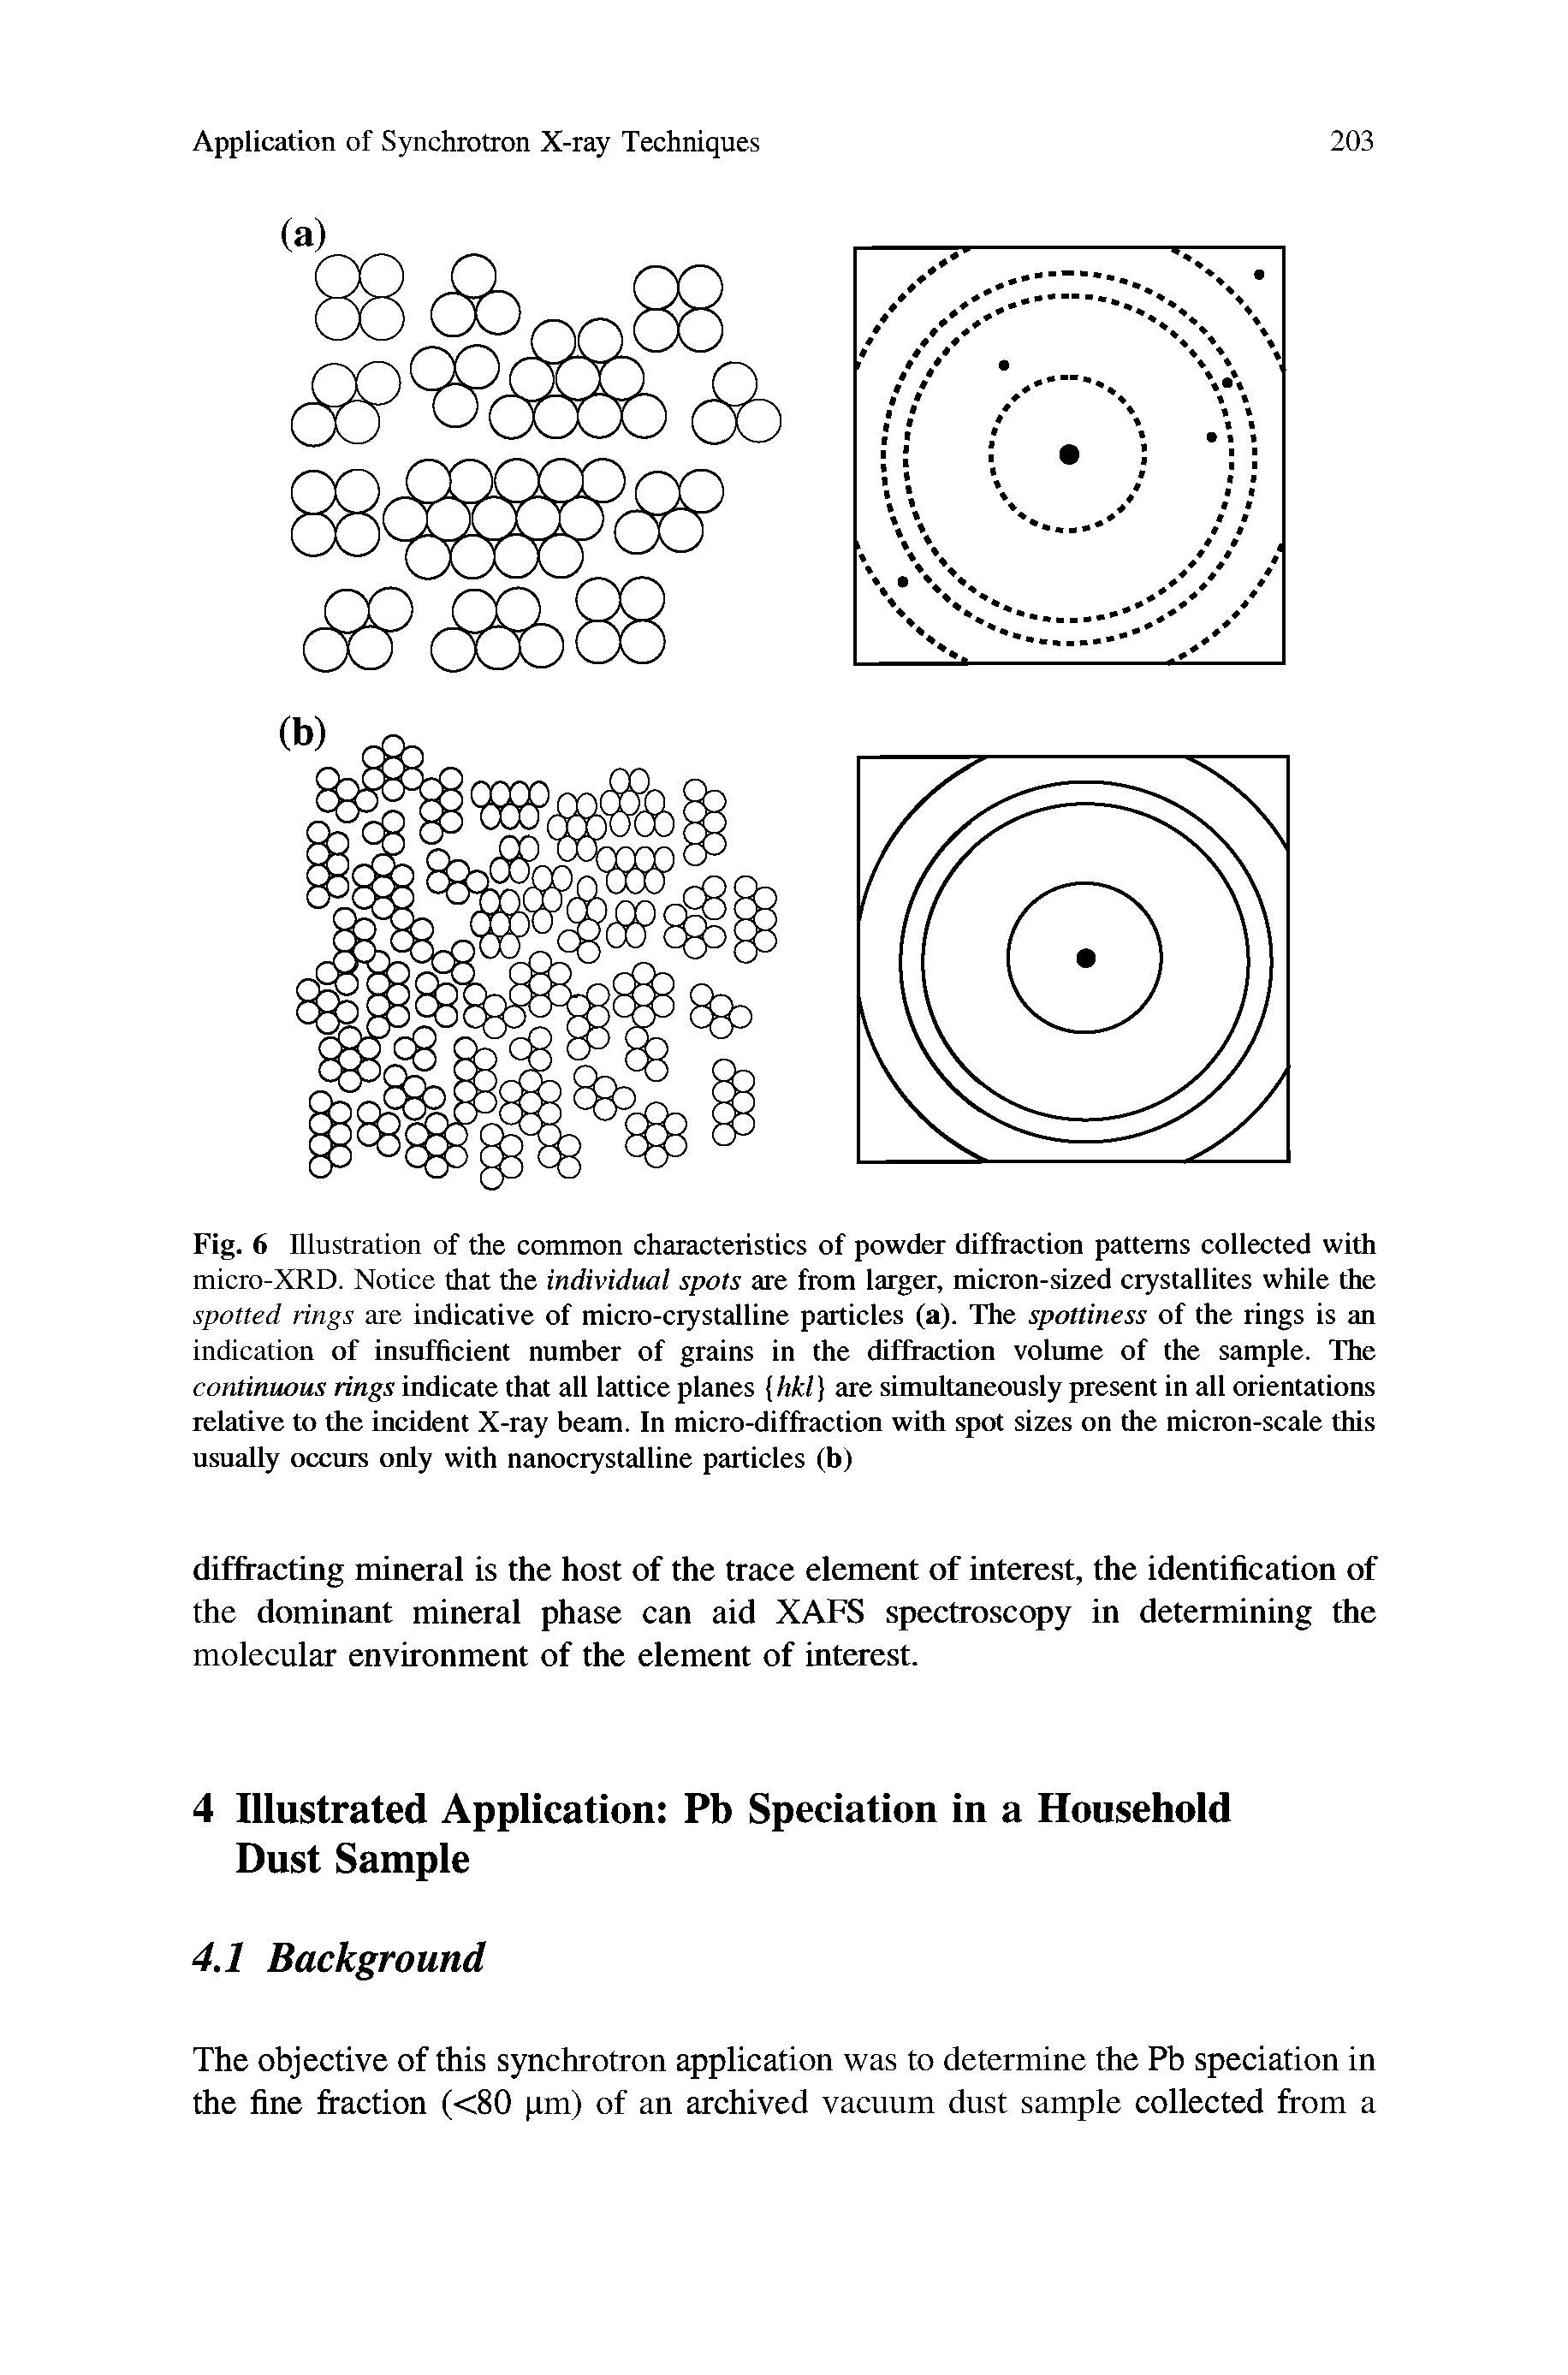 Fig. 6 Illustration of the common characteristics of powder diffraction patterns collected with micro-XRD. Notice that the individual spots are from larger, micron-sized crystallites while the spotted rings are indicative of micro-crystalline particles (a). The spottiness of the rings is an indication of insufficient number of grains in the dif aetion volume of the sample. The continuous rings indicate that all lattice planes hkl are simultaneously present in all orientations relative to the incident X-ray beam. In micro-diffraction with spot sizes on the micron-scale this usually occurs only with nanocrystalline particles (b)...